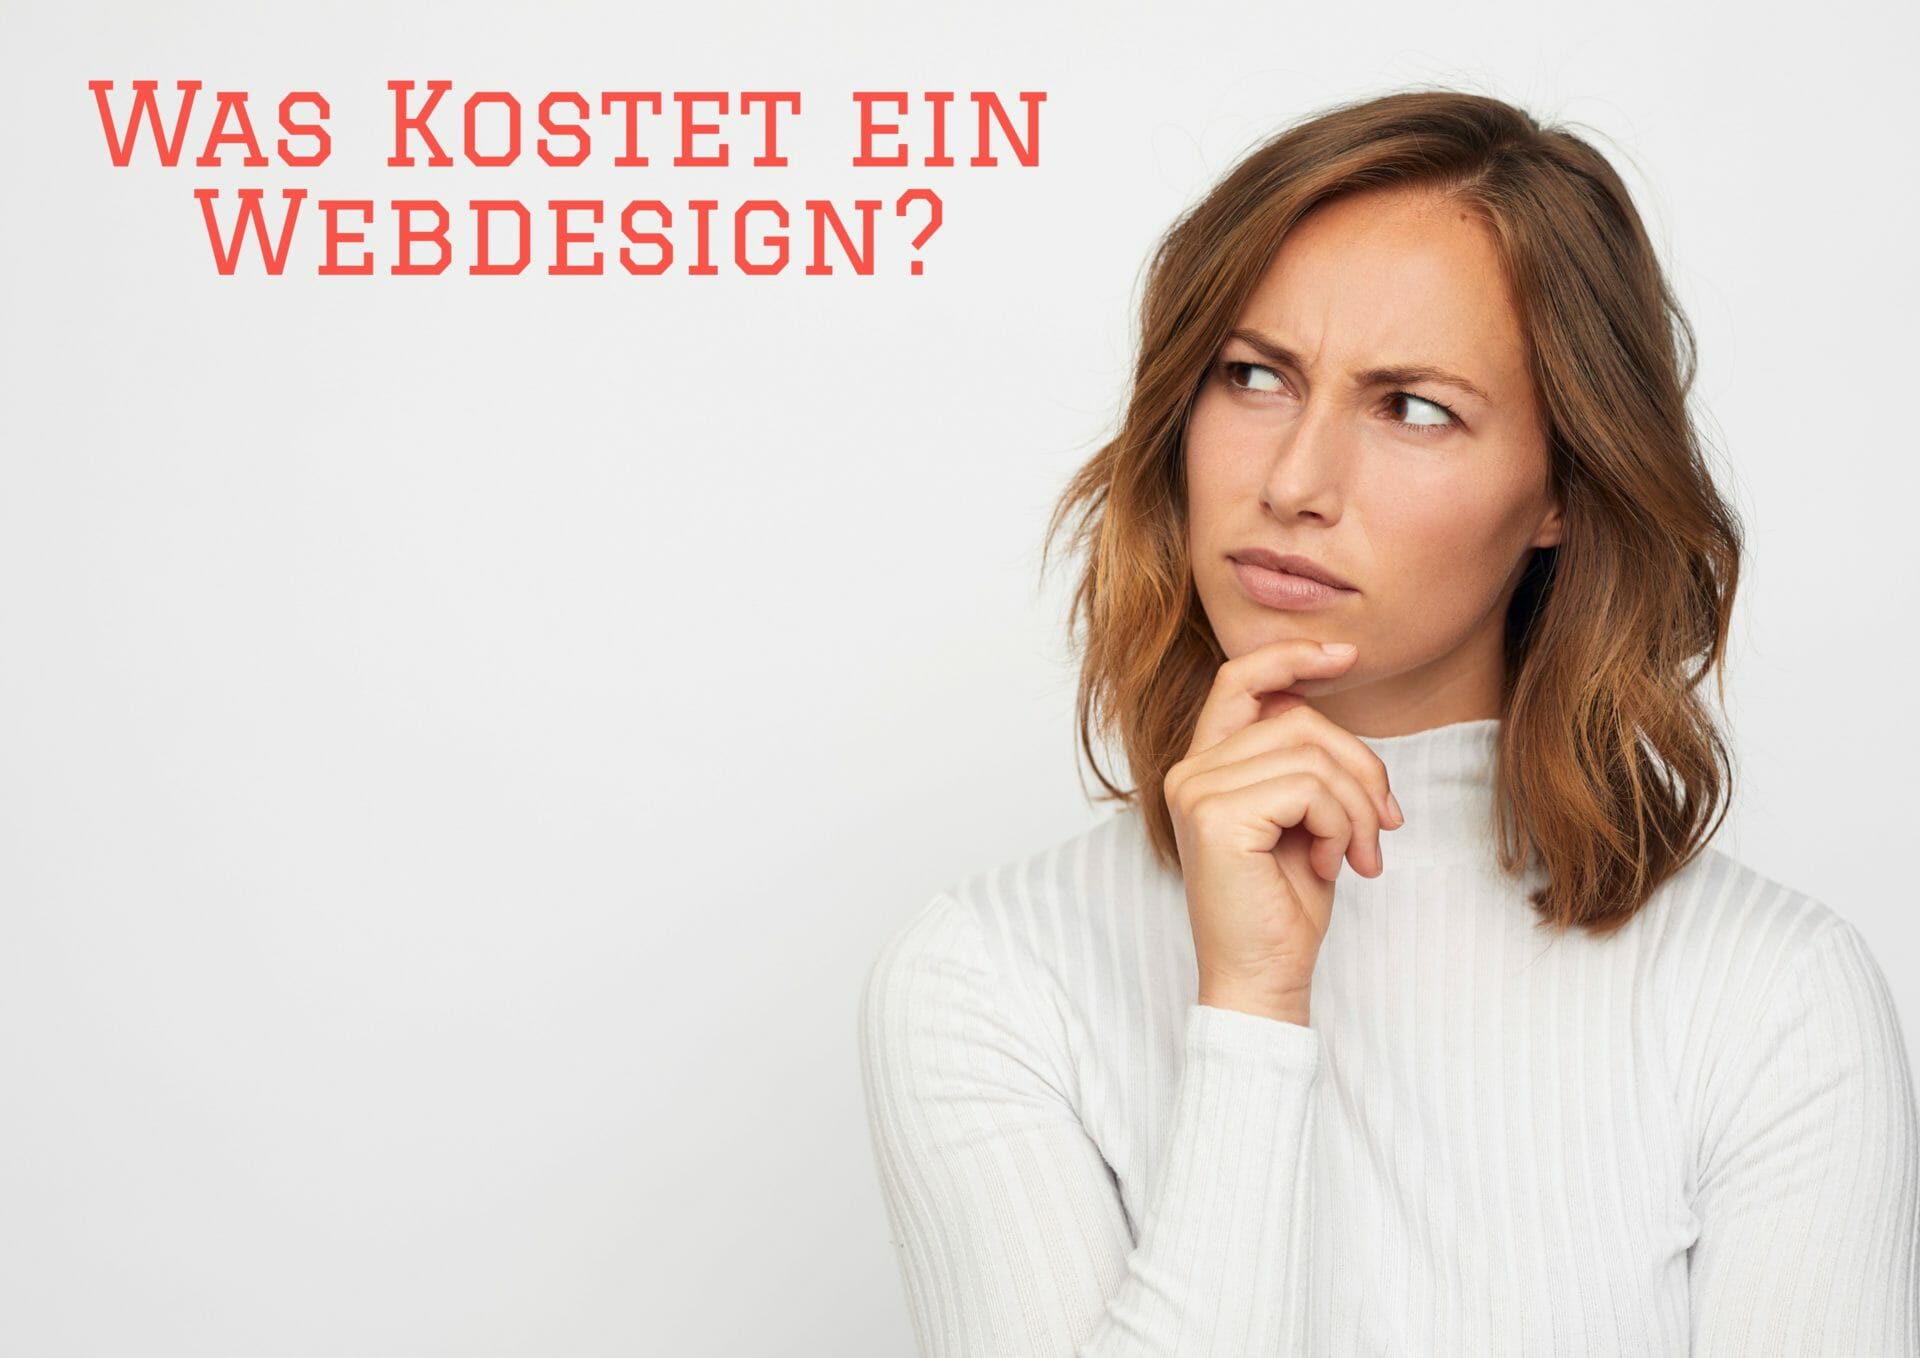 What does a web design cost?